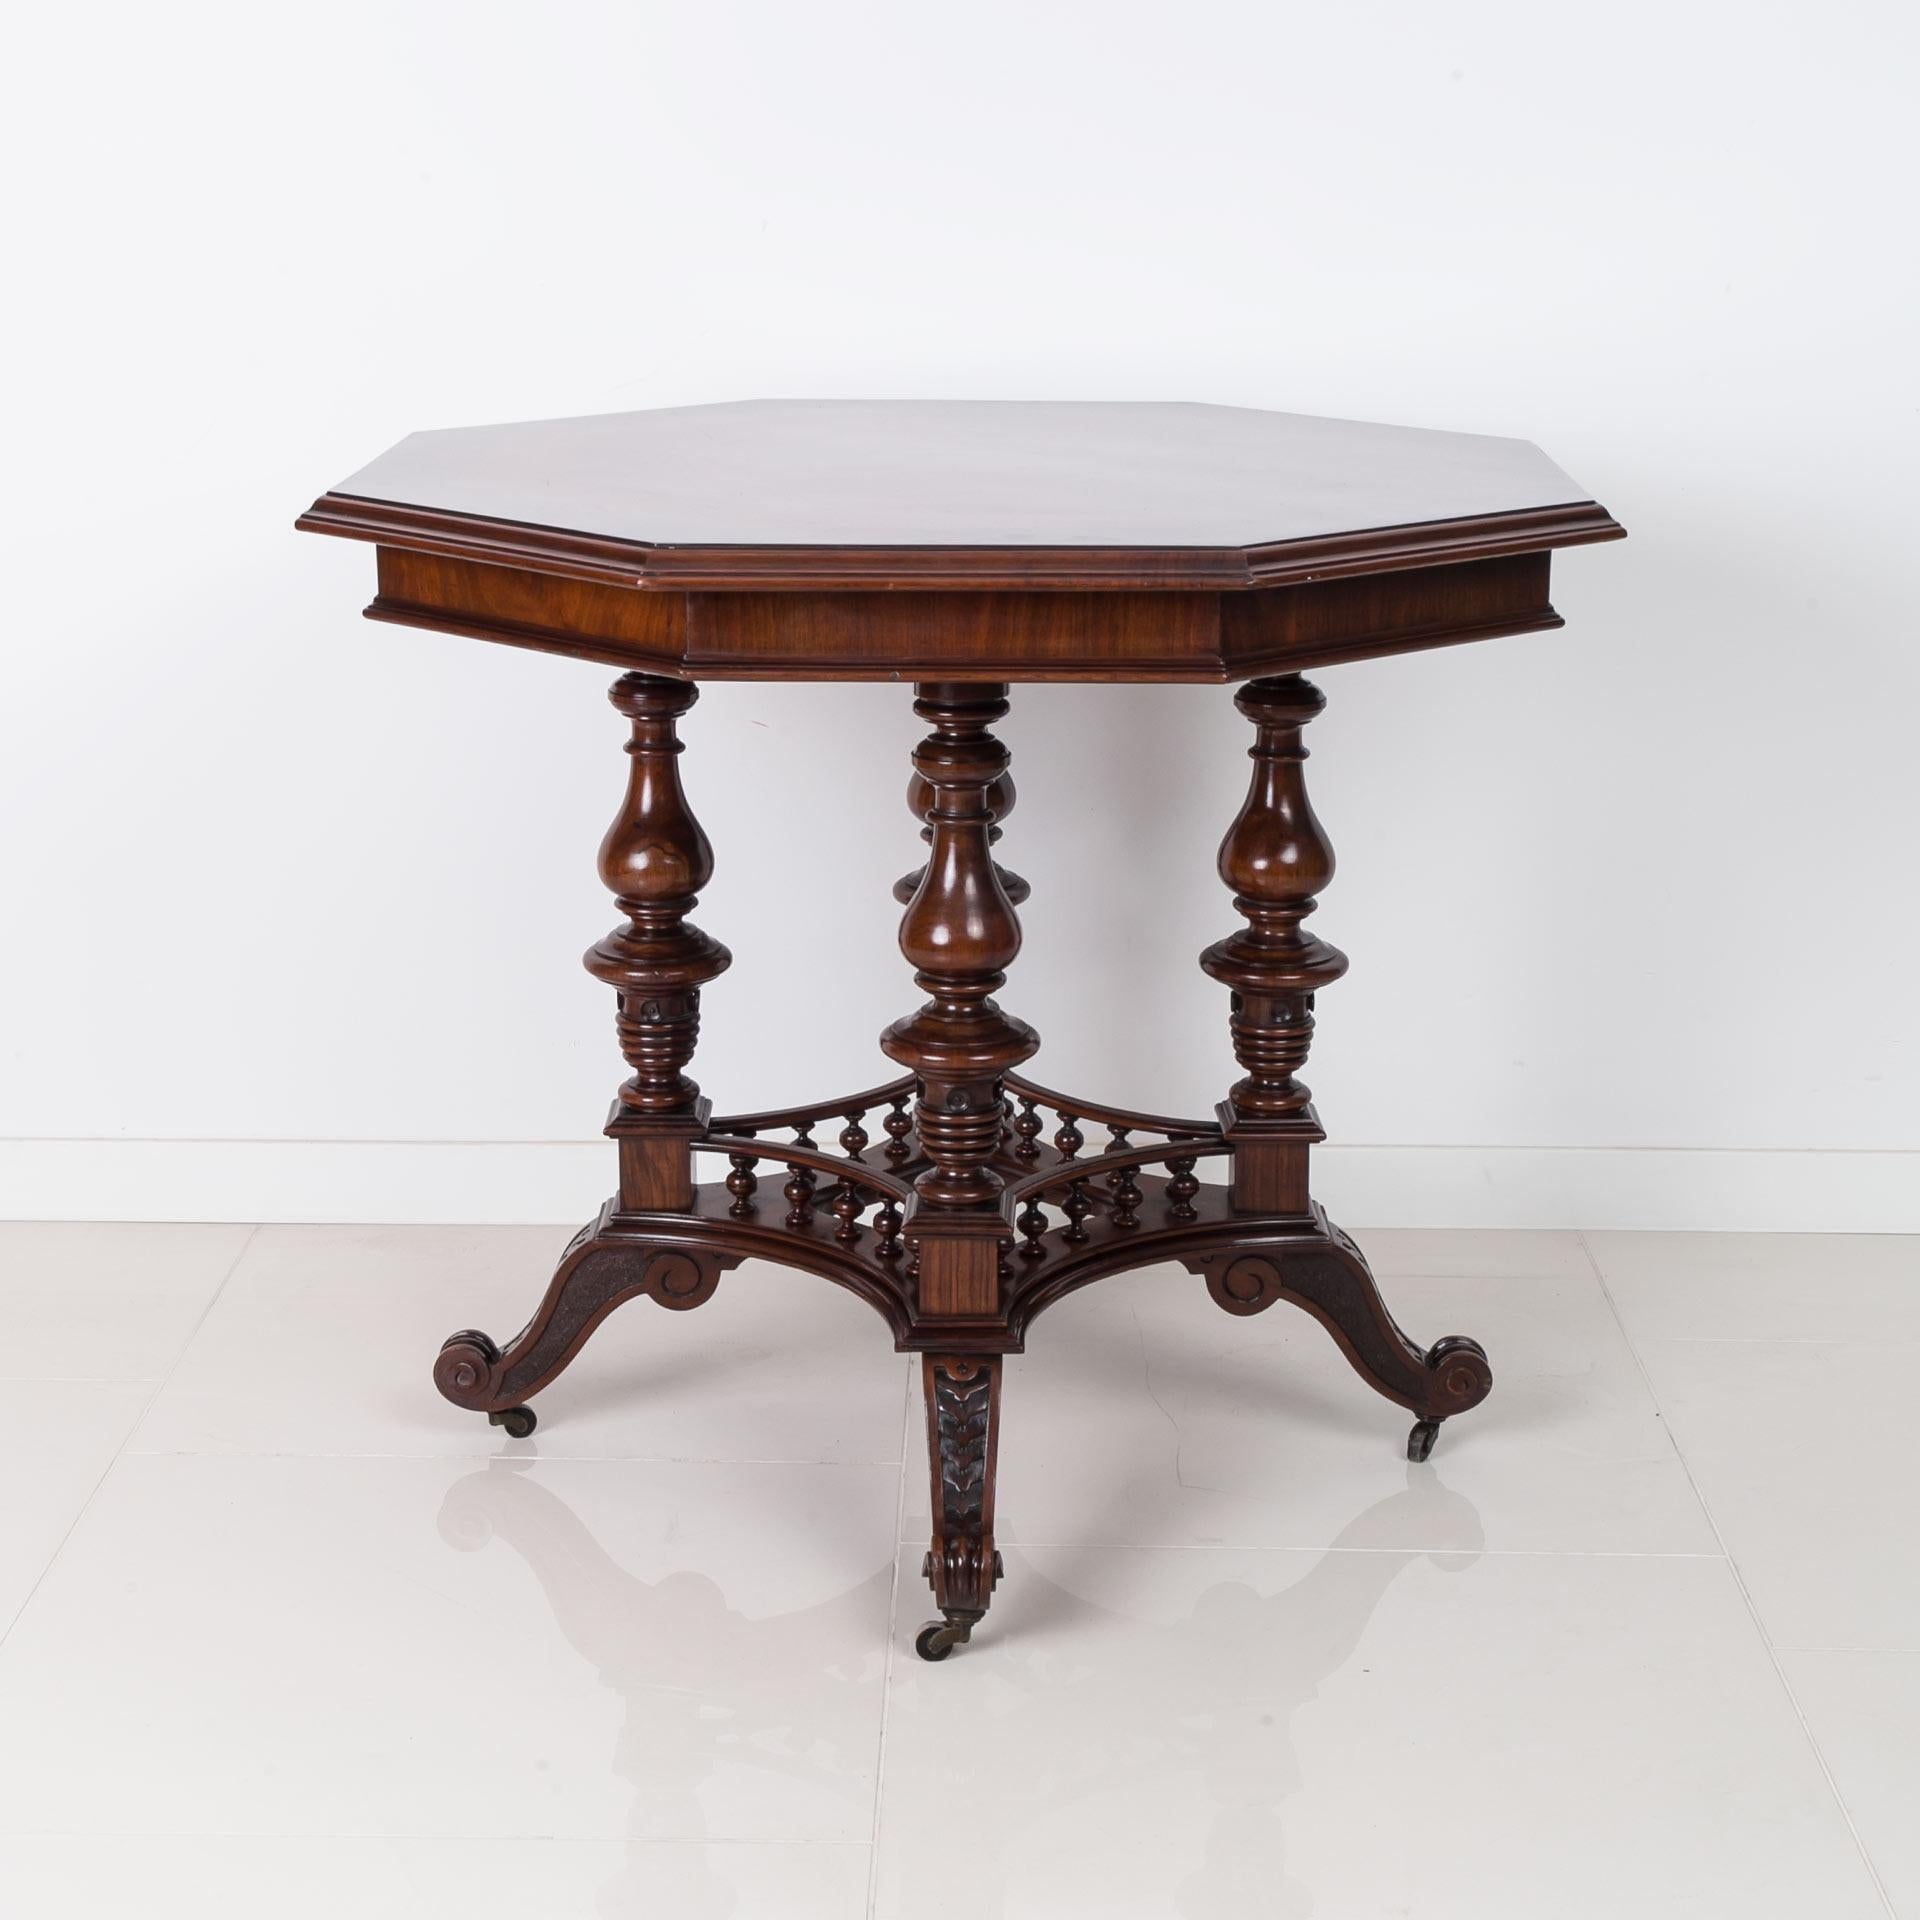 Polish Eclectic Walnut Table, Poland, 19th Century For Sale